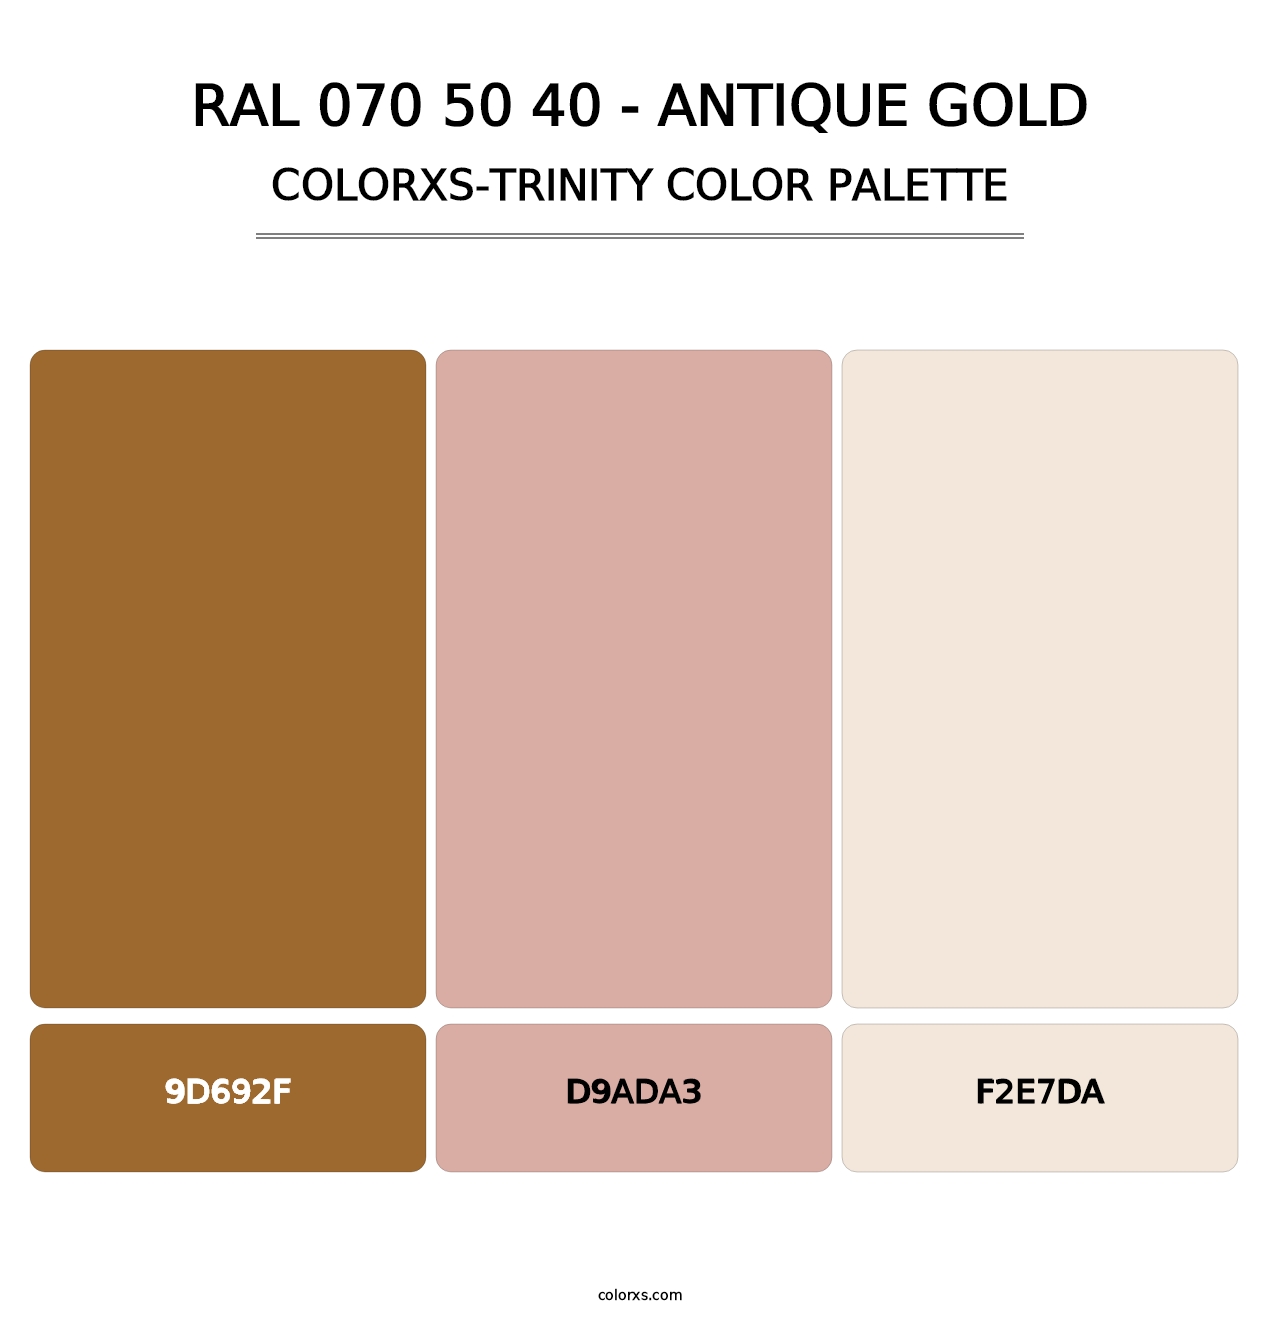 RAL 070 50 40 - Antique Gold - Colorxs Trinity Palette